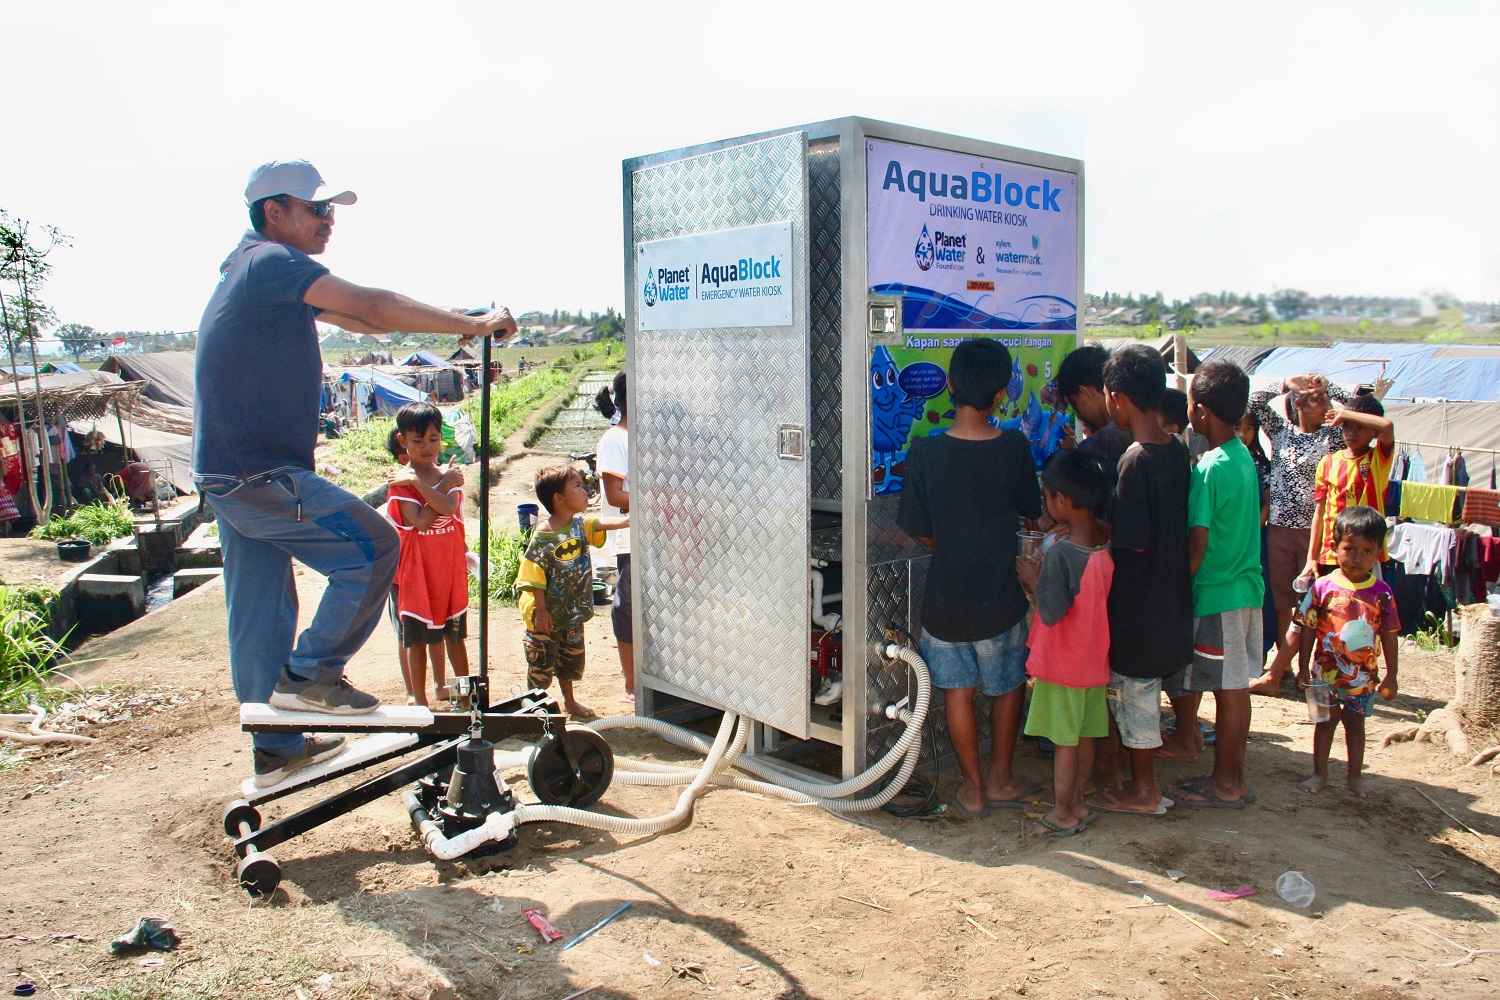 The partnership provided water to the local community after the Lombok earthquake in Indonesia.